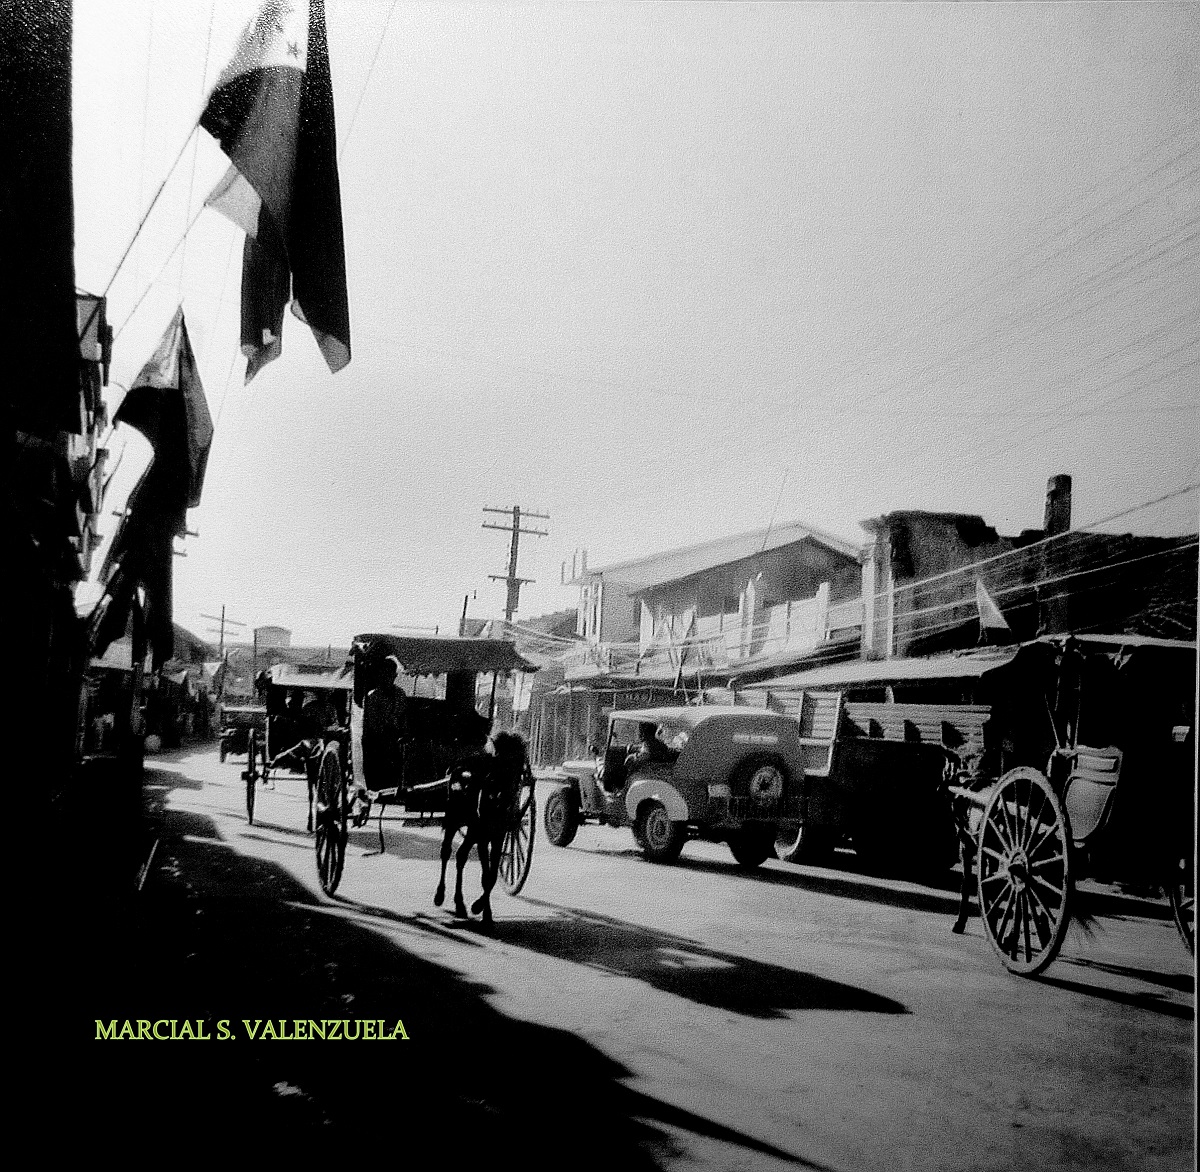 DAGUPAN CITY THEN AND NOW